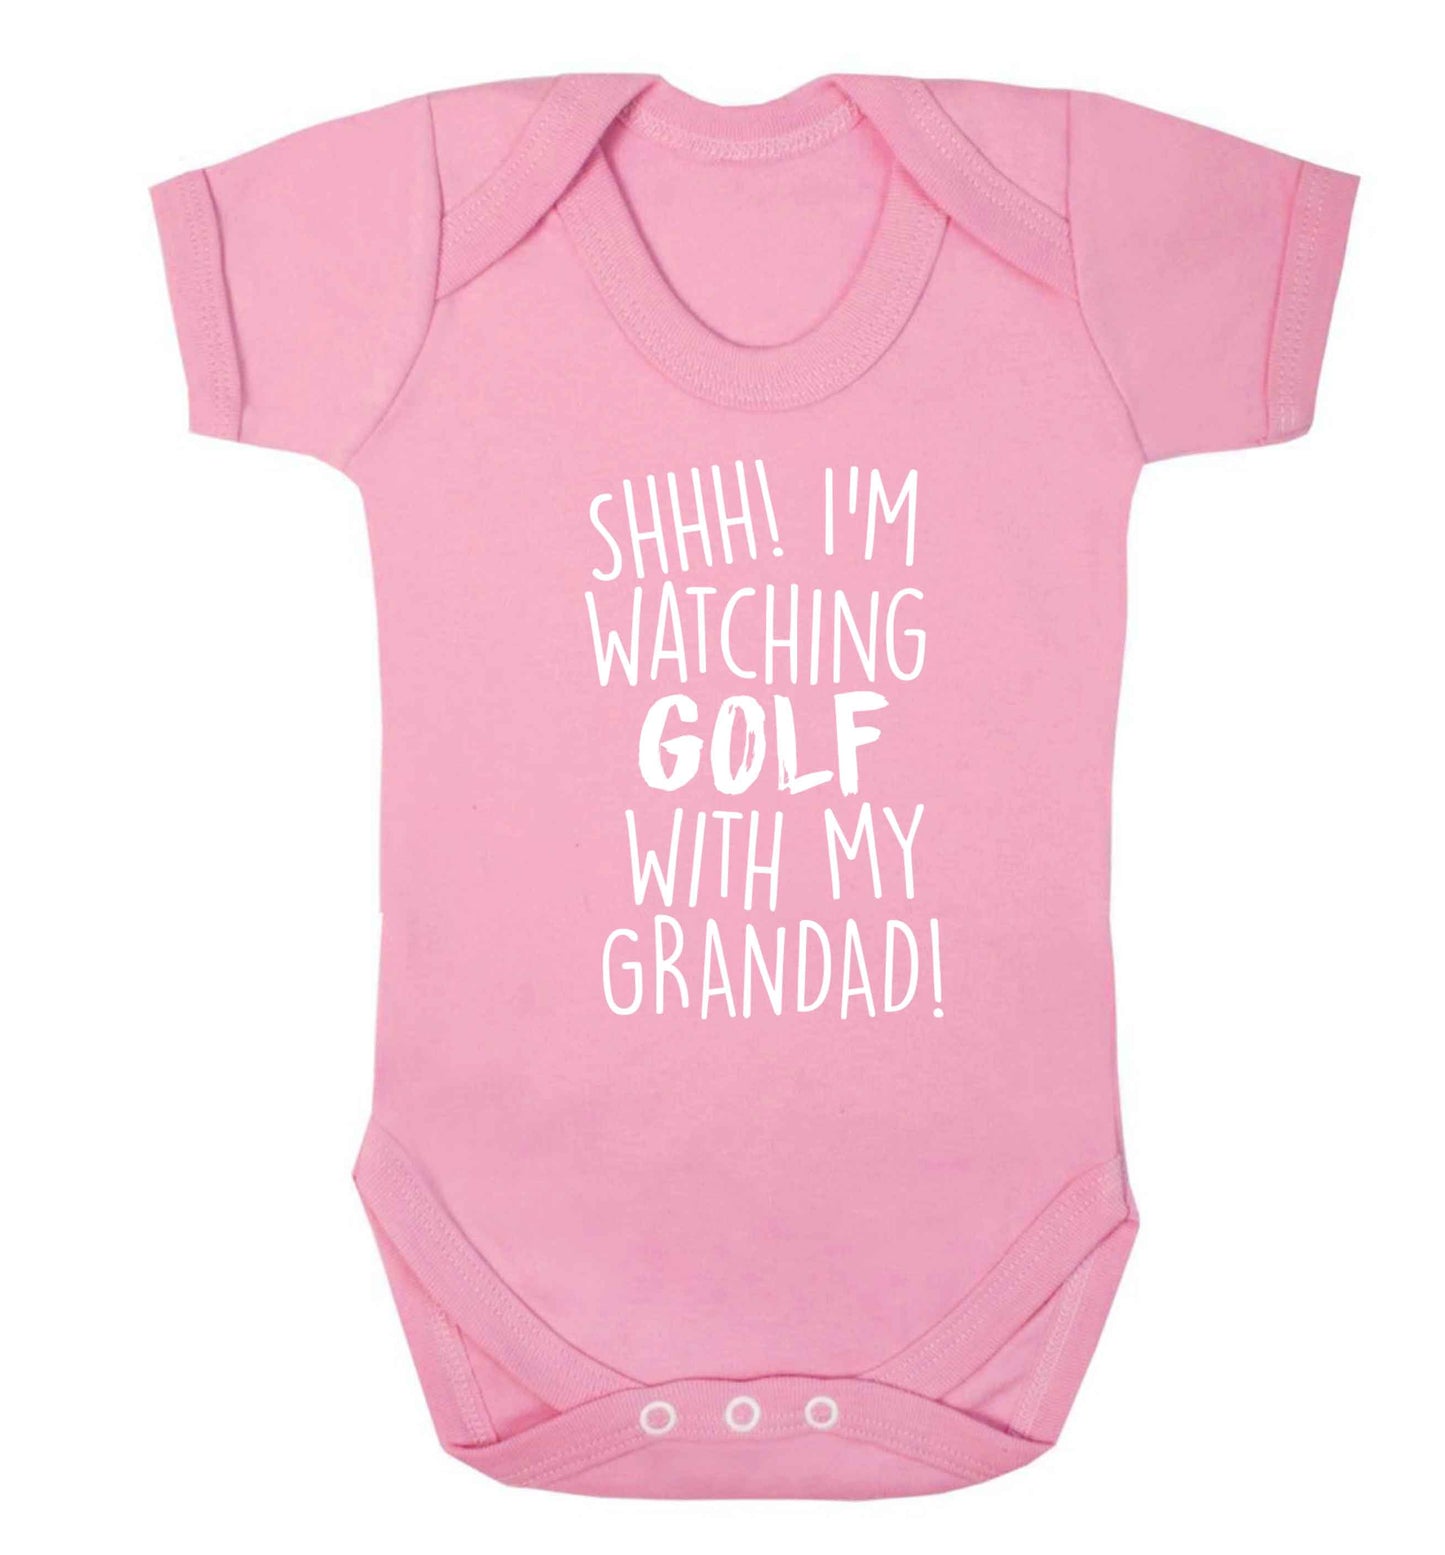 Shh I'm watching golf with my grandad Baby Vest pale pink 18-24 months